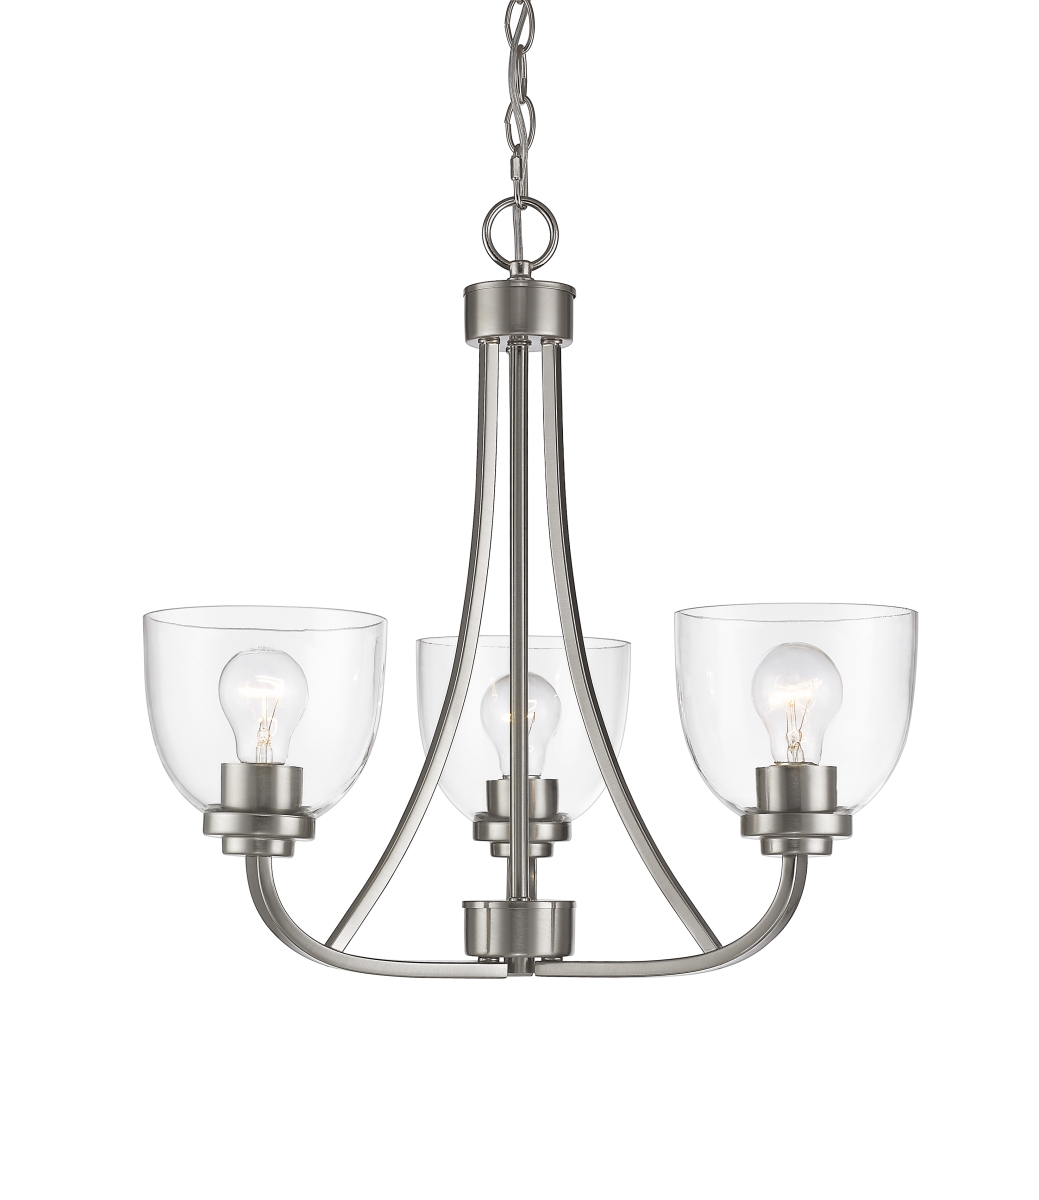 Z Lite 460-3-bn Ashton 3 Light Chandelier With Clear Glass, Brushed Nickel - 19.75 X 20.5 X 20.5 In.